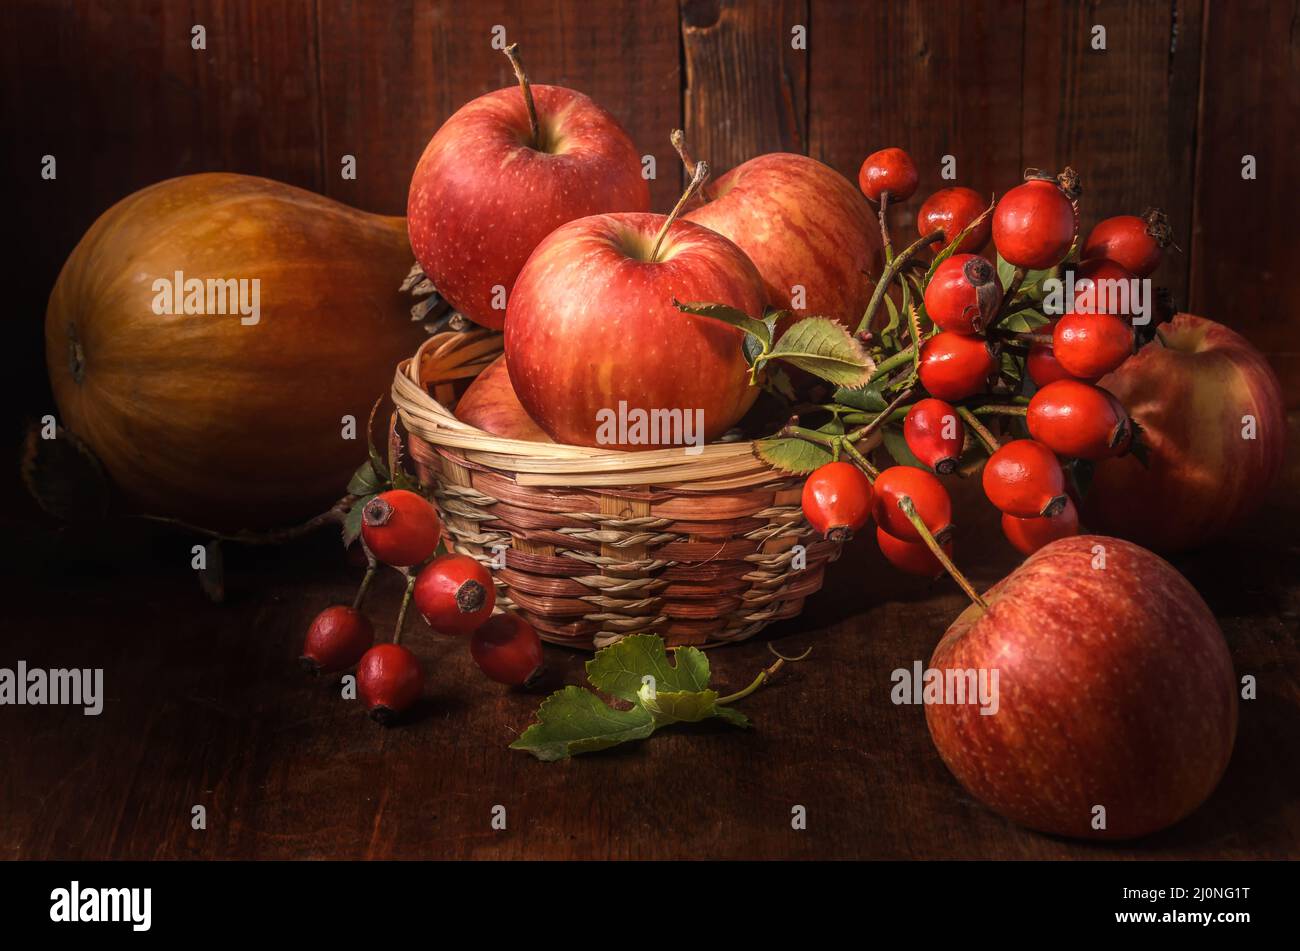 Apples and other fruits on a dark wooden background in a rustic style Stock Photo